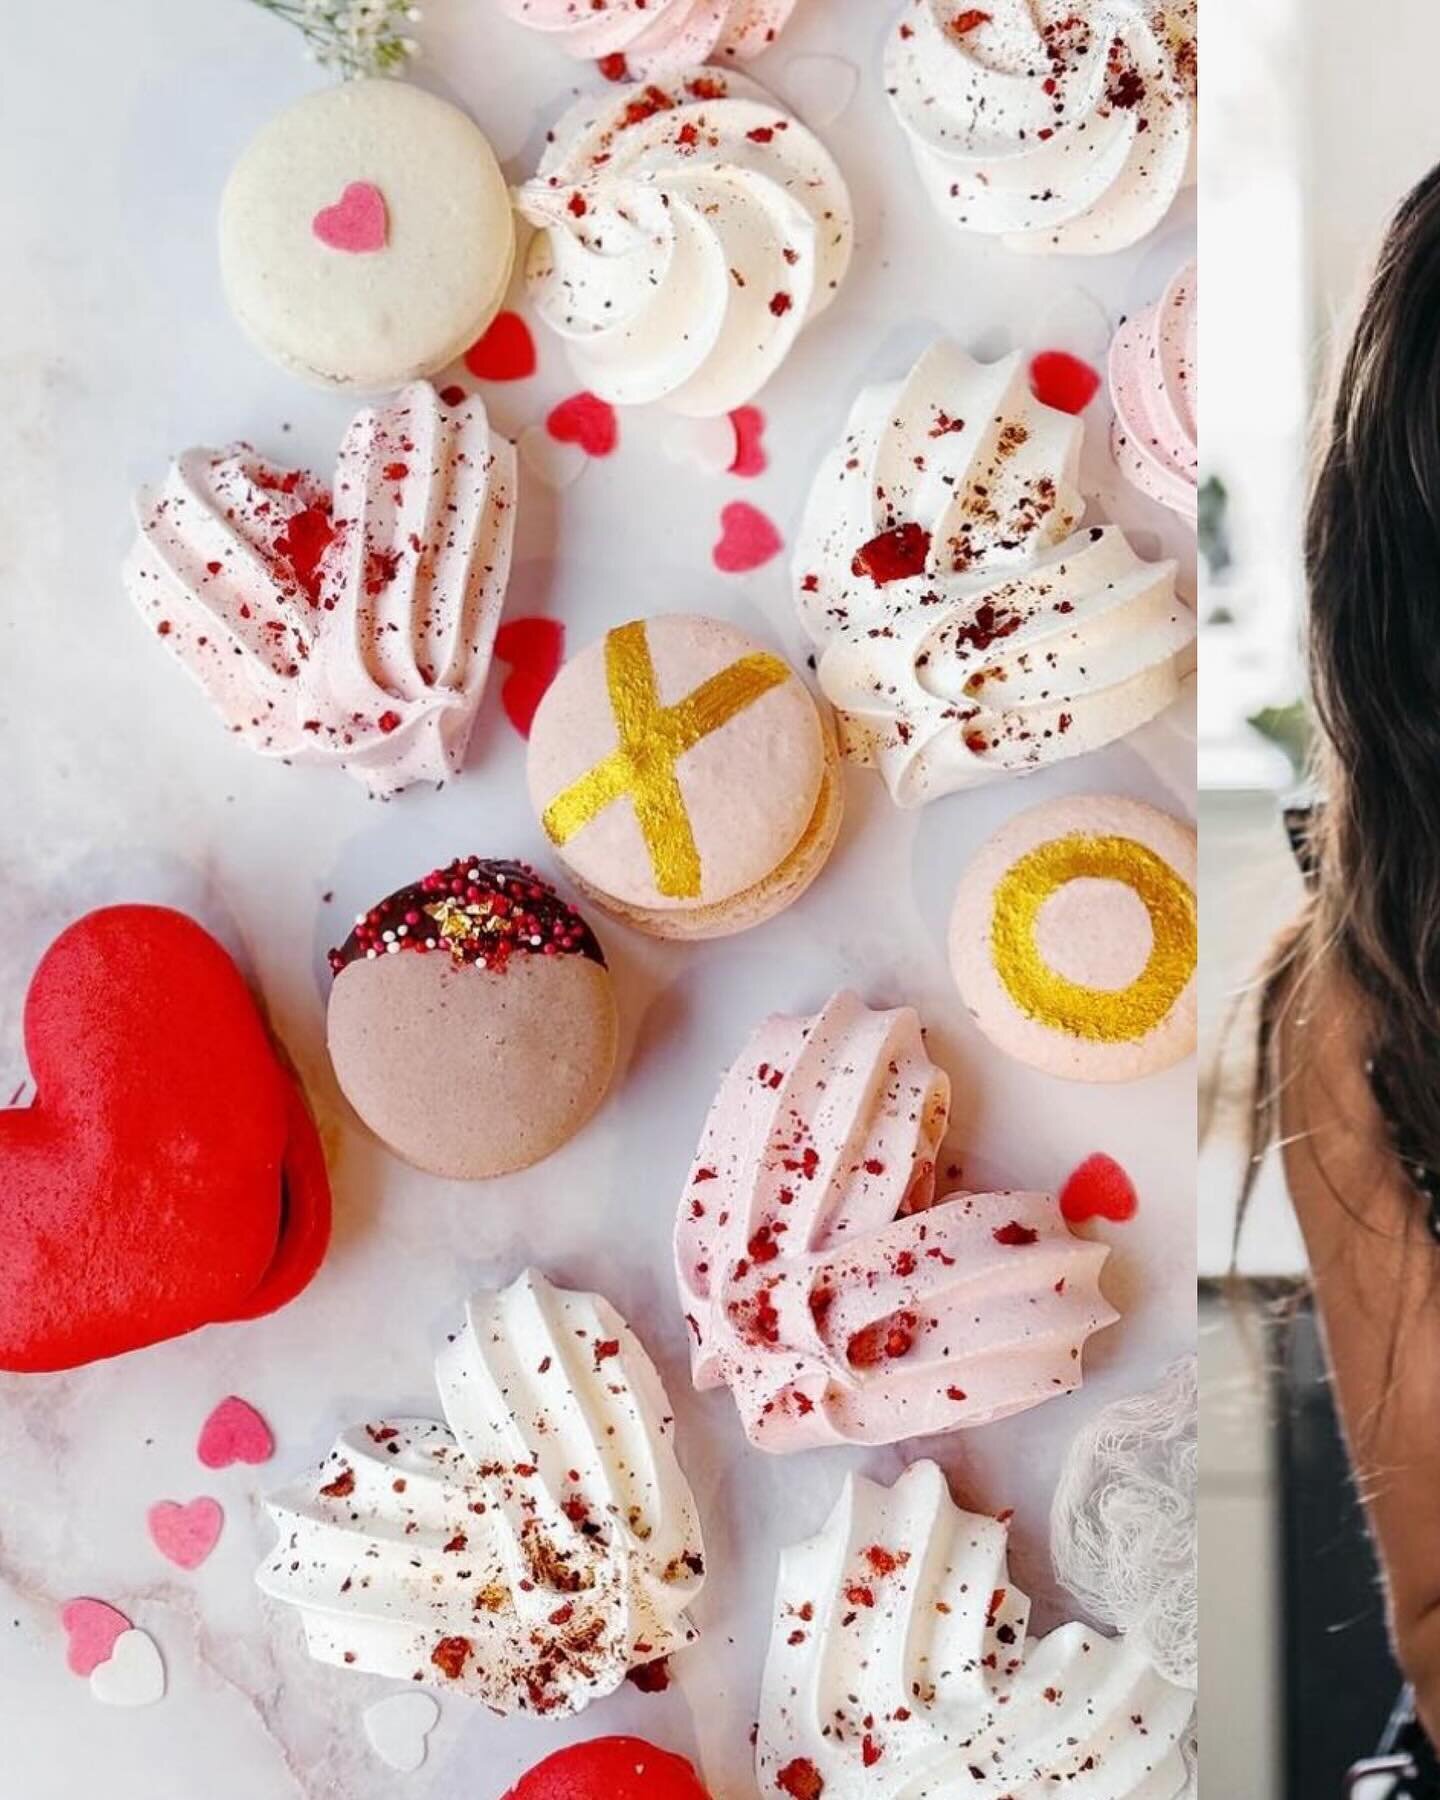 Happy Valentine&rsquo;s Day! ❤️ Today we are sharing some LOVE for one of our sweet vendors. Let us introduce you to our friend Hannah @honey.bakes.cakery . Her desserts are truly a work of art! They also taste as good as they look. We love the intri